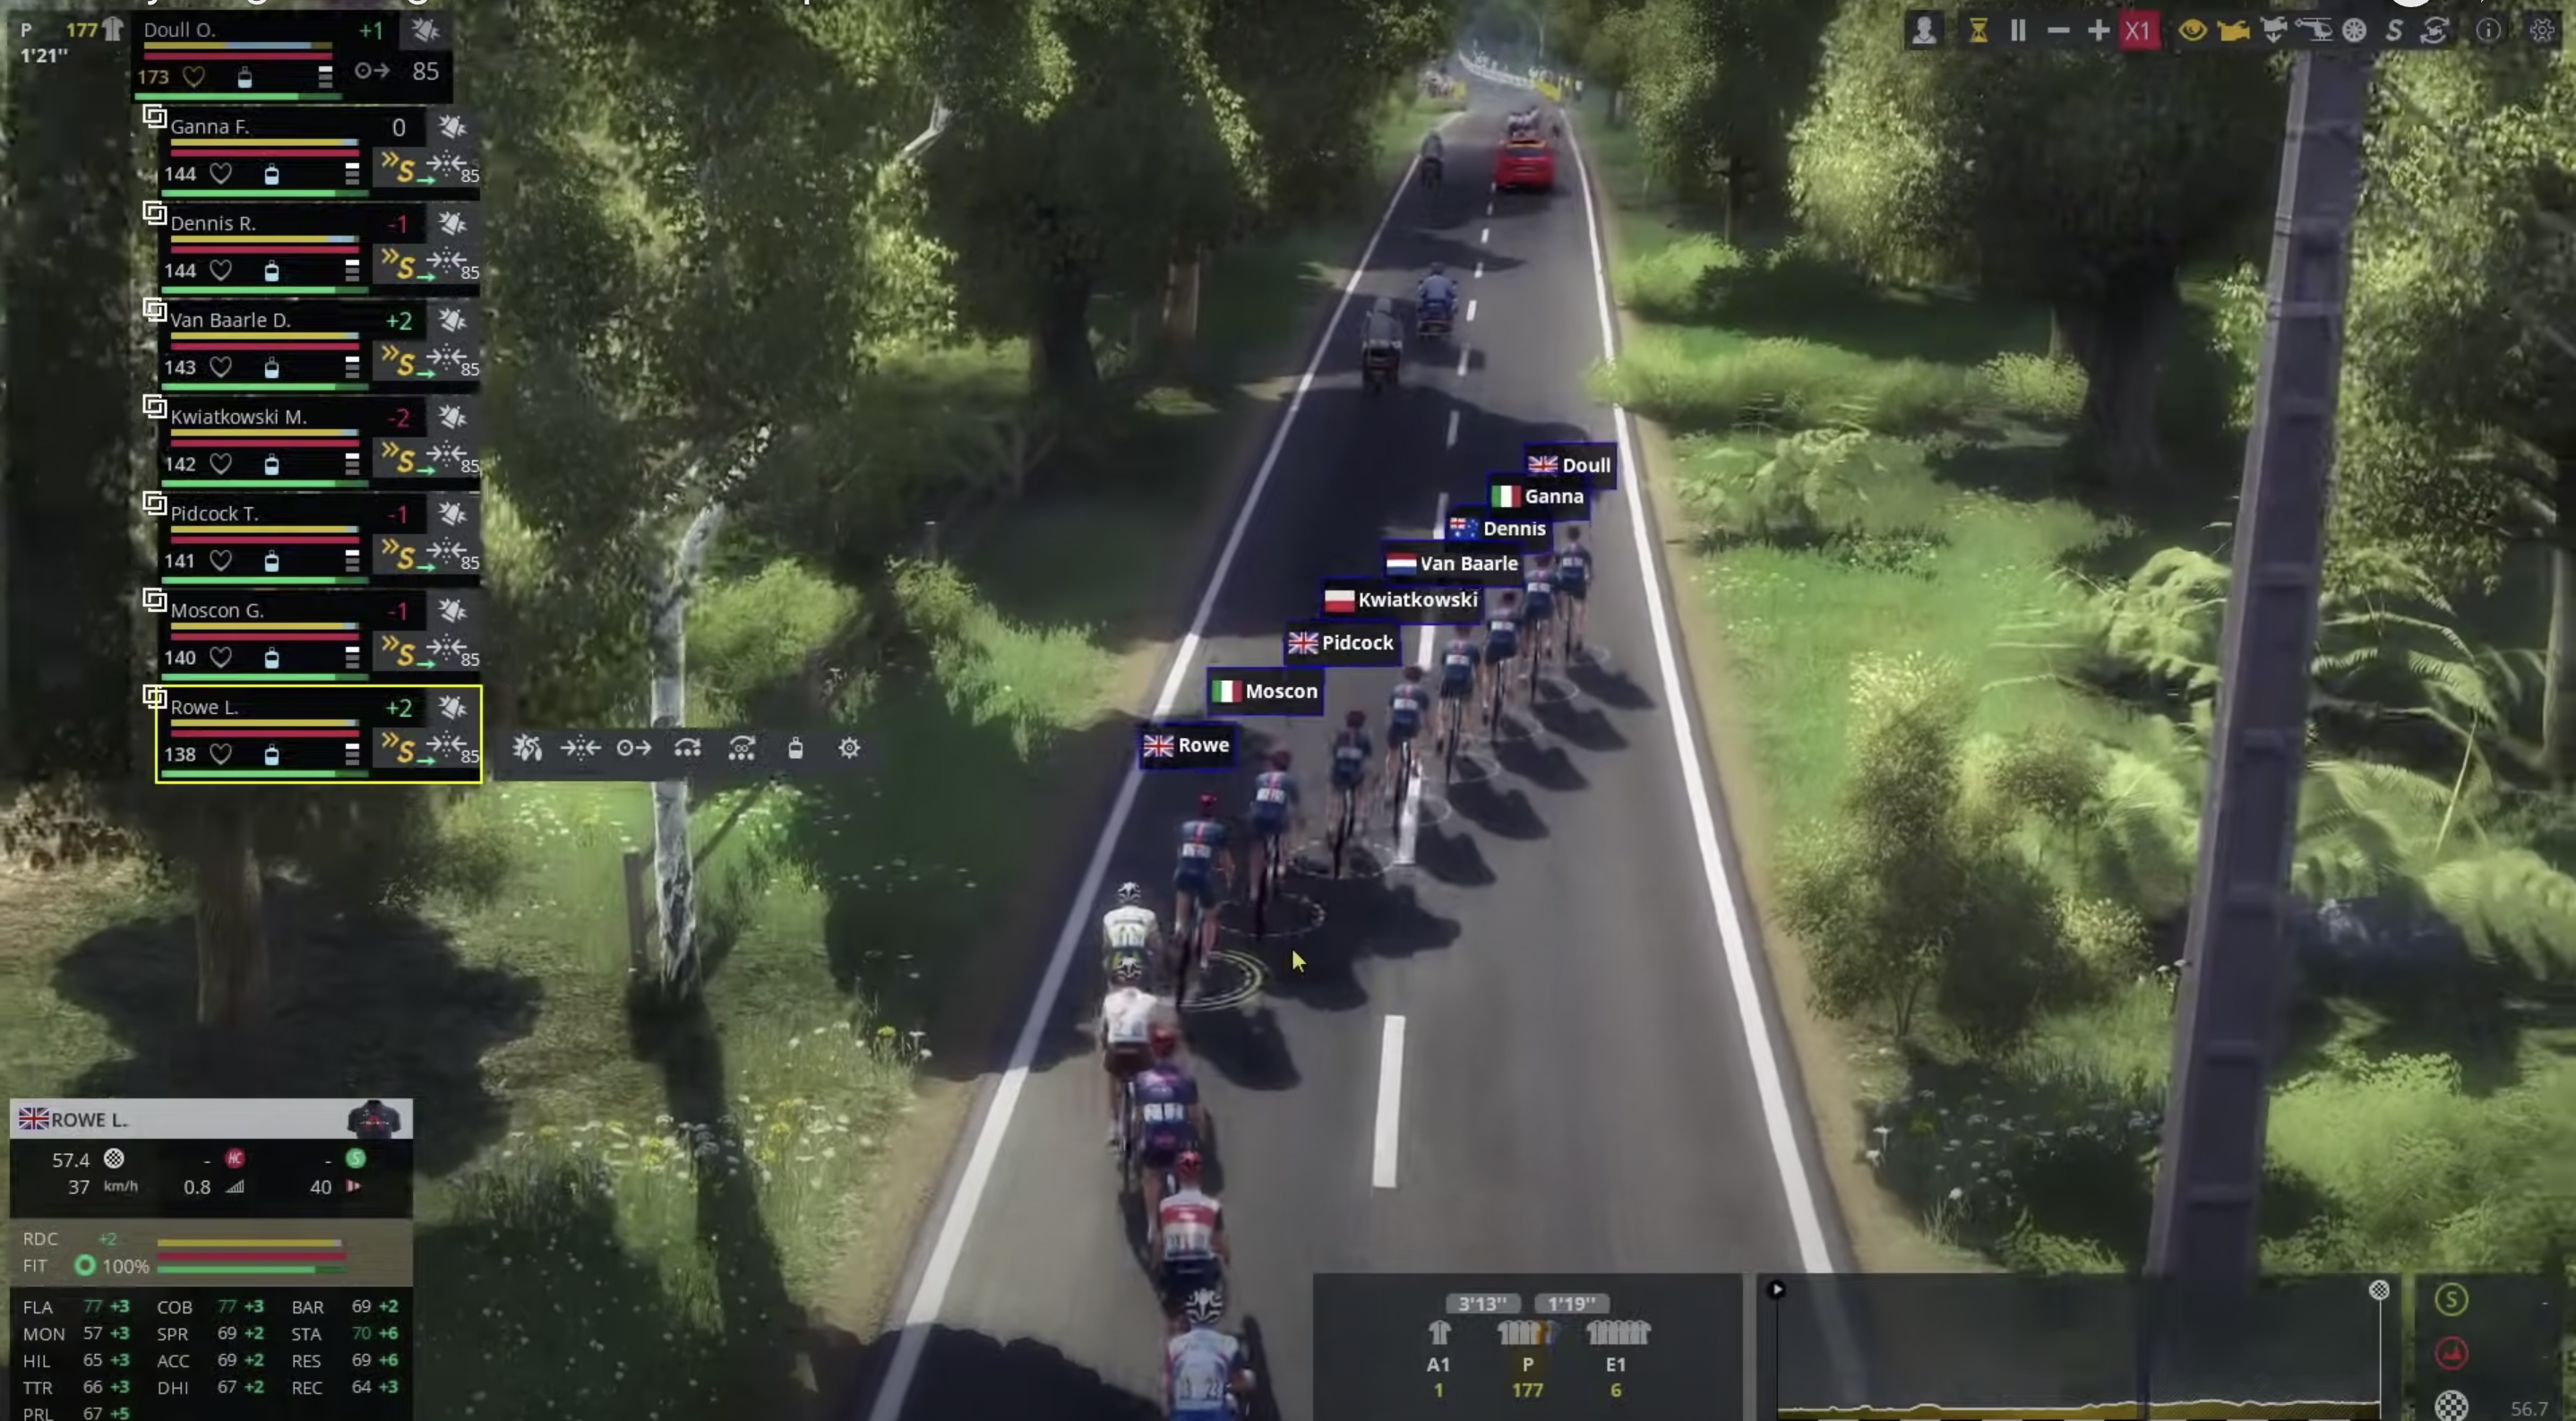 Pro Cycling Manager 2021 - OpenCritic